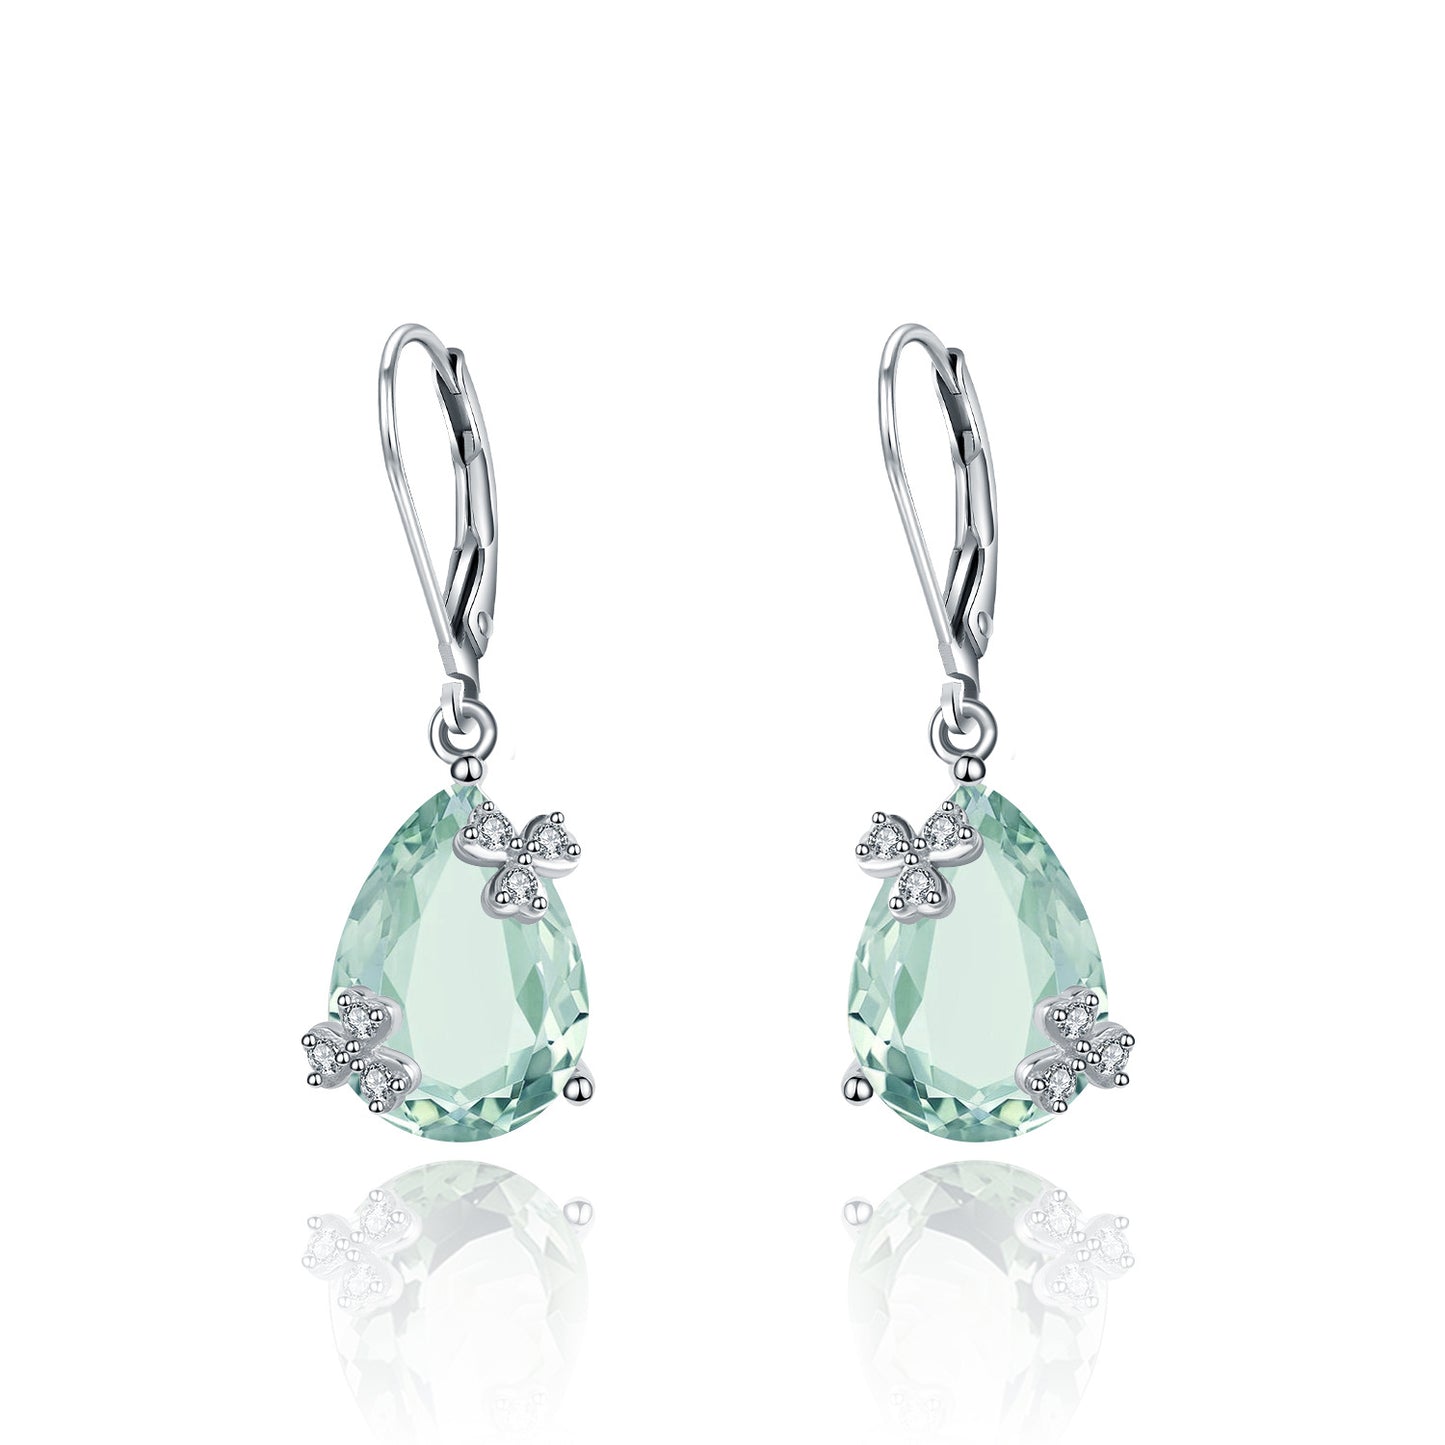 Personalized Design Natural Cyan Crystal Pear Drop Three Prongs with Flower Silver Drop Earrings for Women